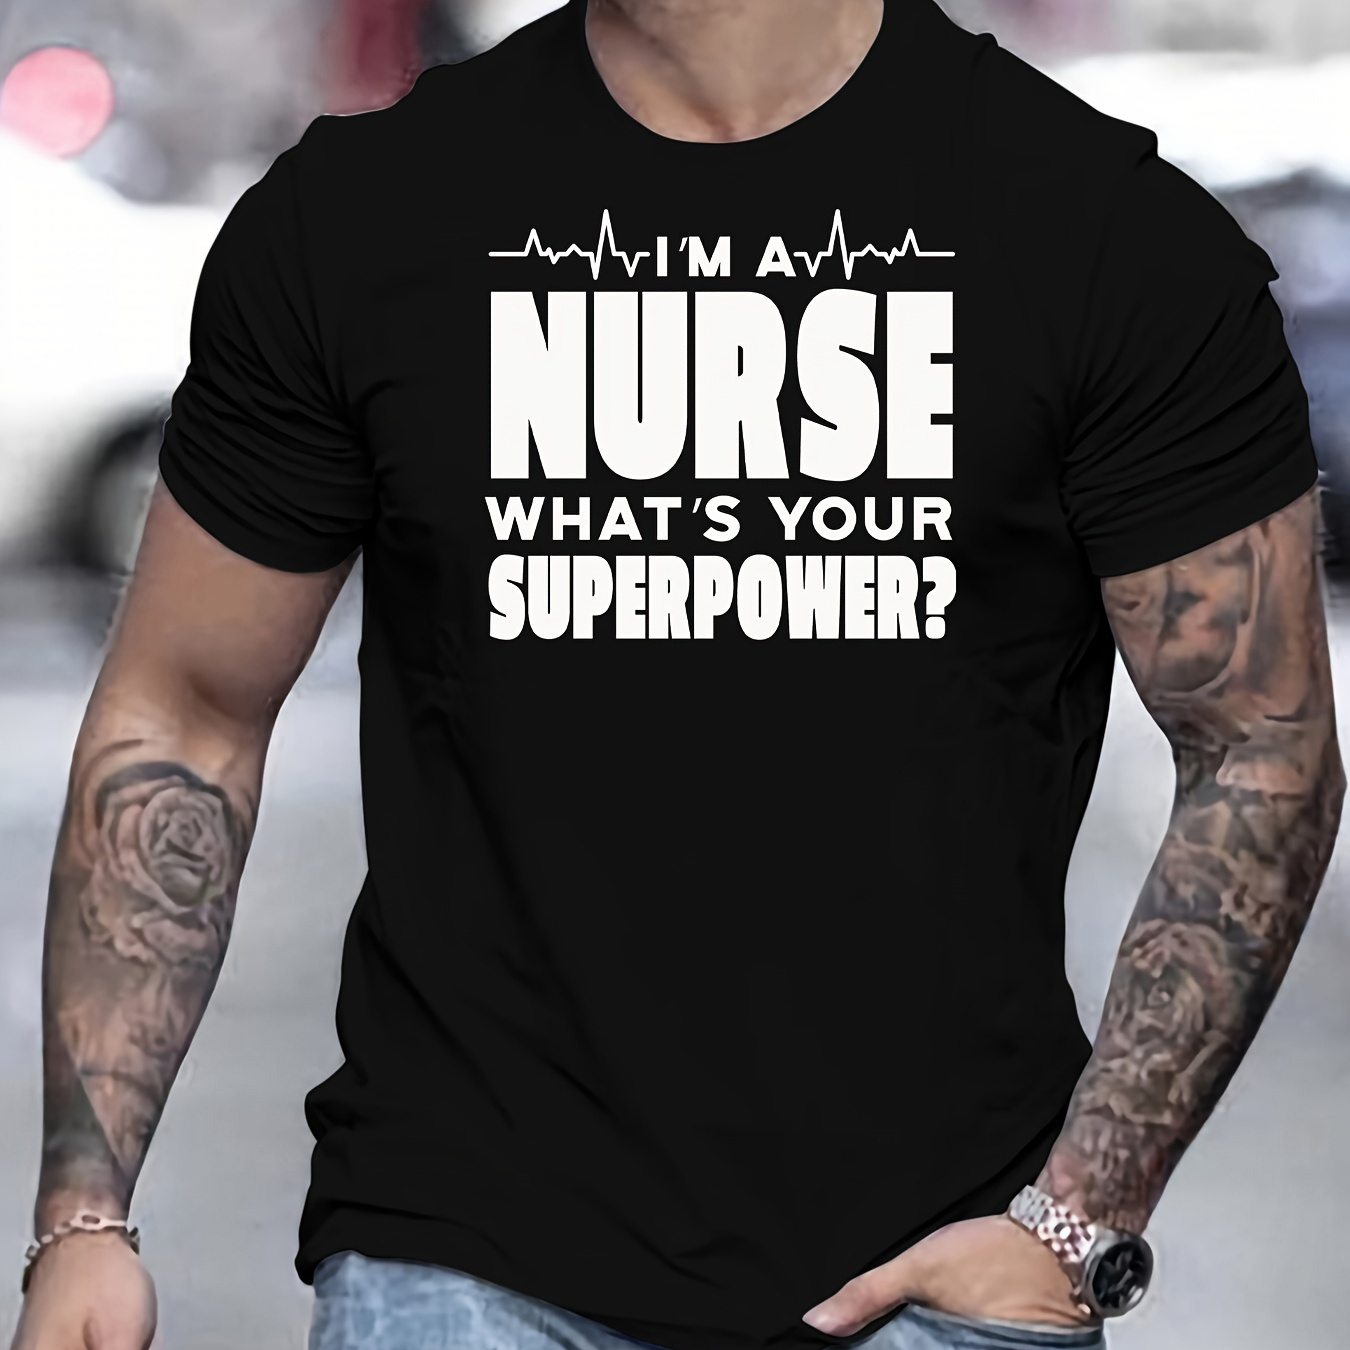 

Nurse What's Your Superpower Print, Men's Round Crew Neck Short Sleeve, Simple Style Tee Fashion Regular Fit T-shirt, Casual Comfy Top For Spring Summer Holiday Leisure Vacation Men's Clothing As Gift